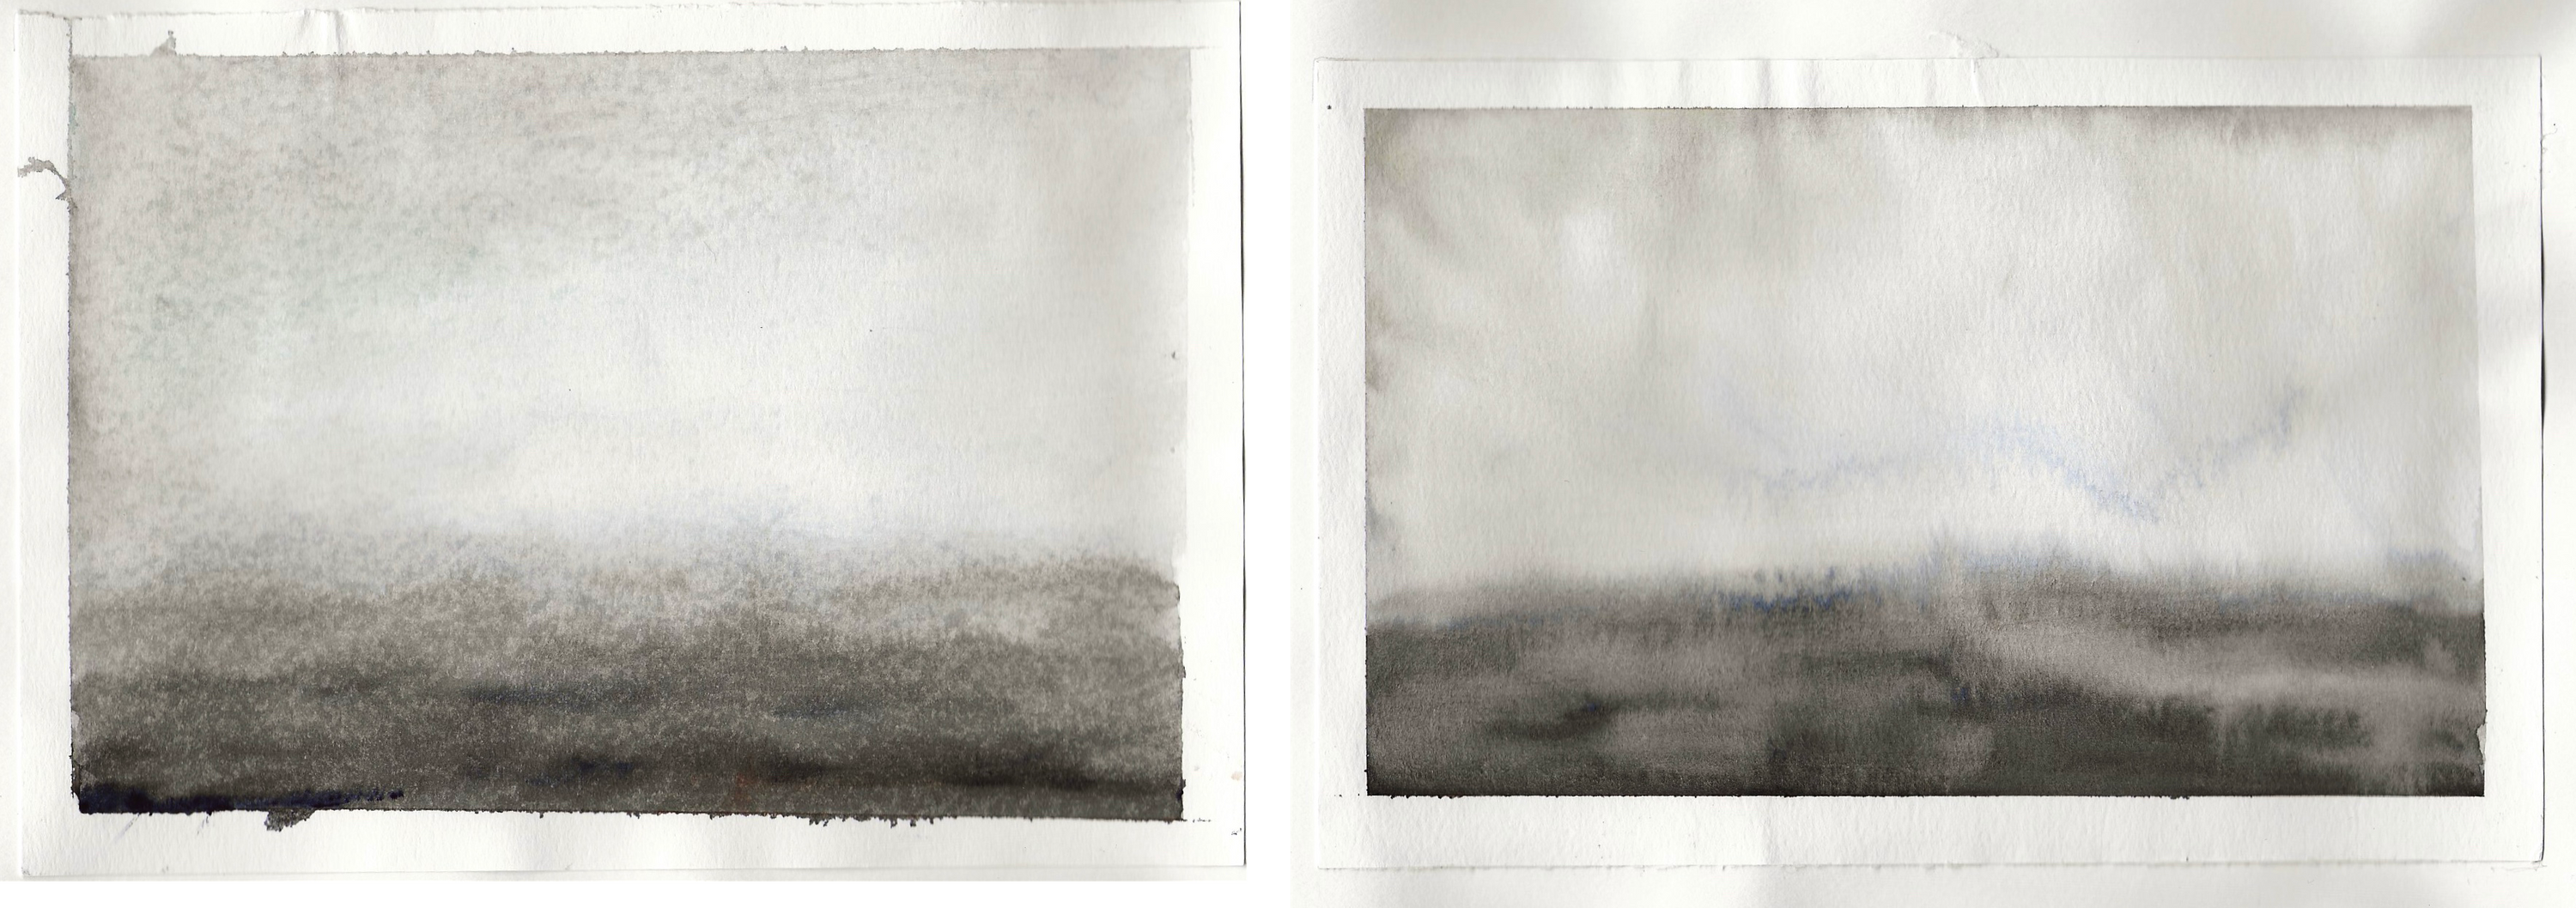 diptych watercolour studies - sequence 2 - #1 #2 - watercolour - 210 x 148mm - 200gsm 120lb